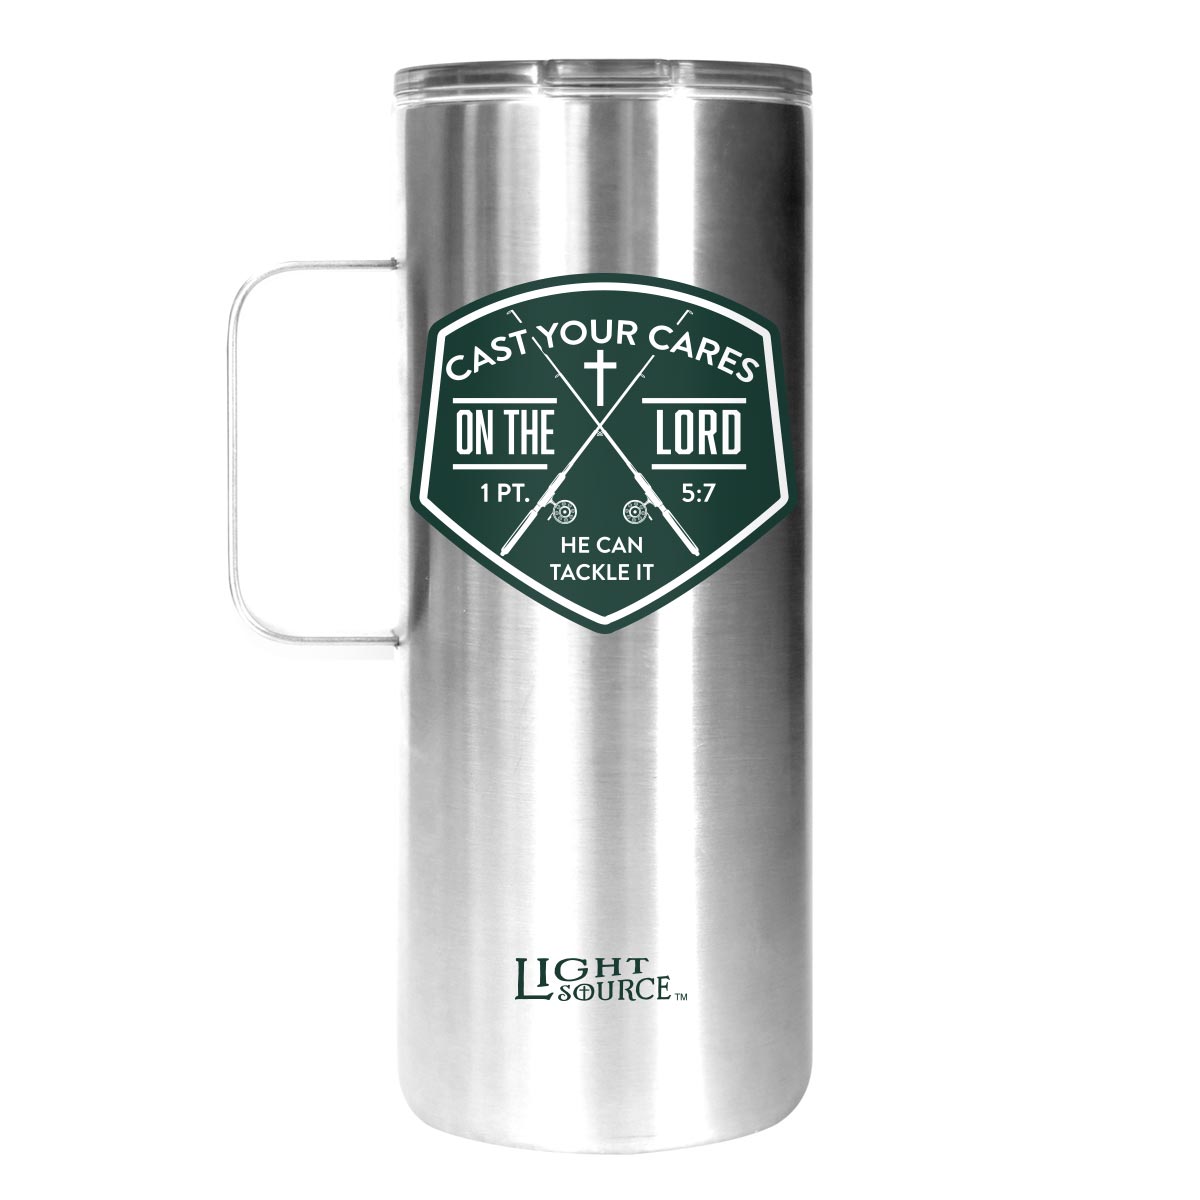 Light Source 22 oz Stainless Steel Mug With Handle Cast Your Cares